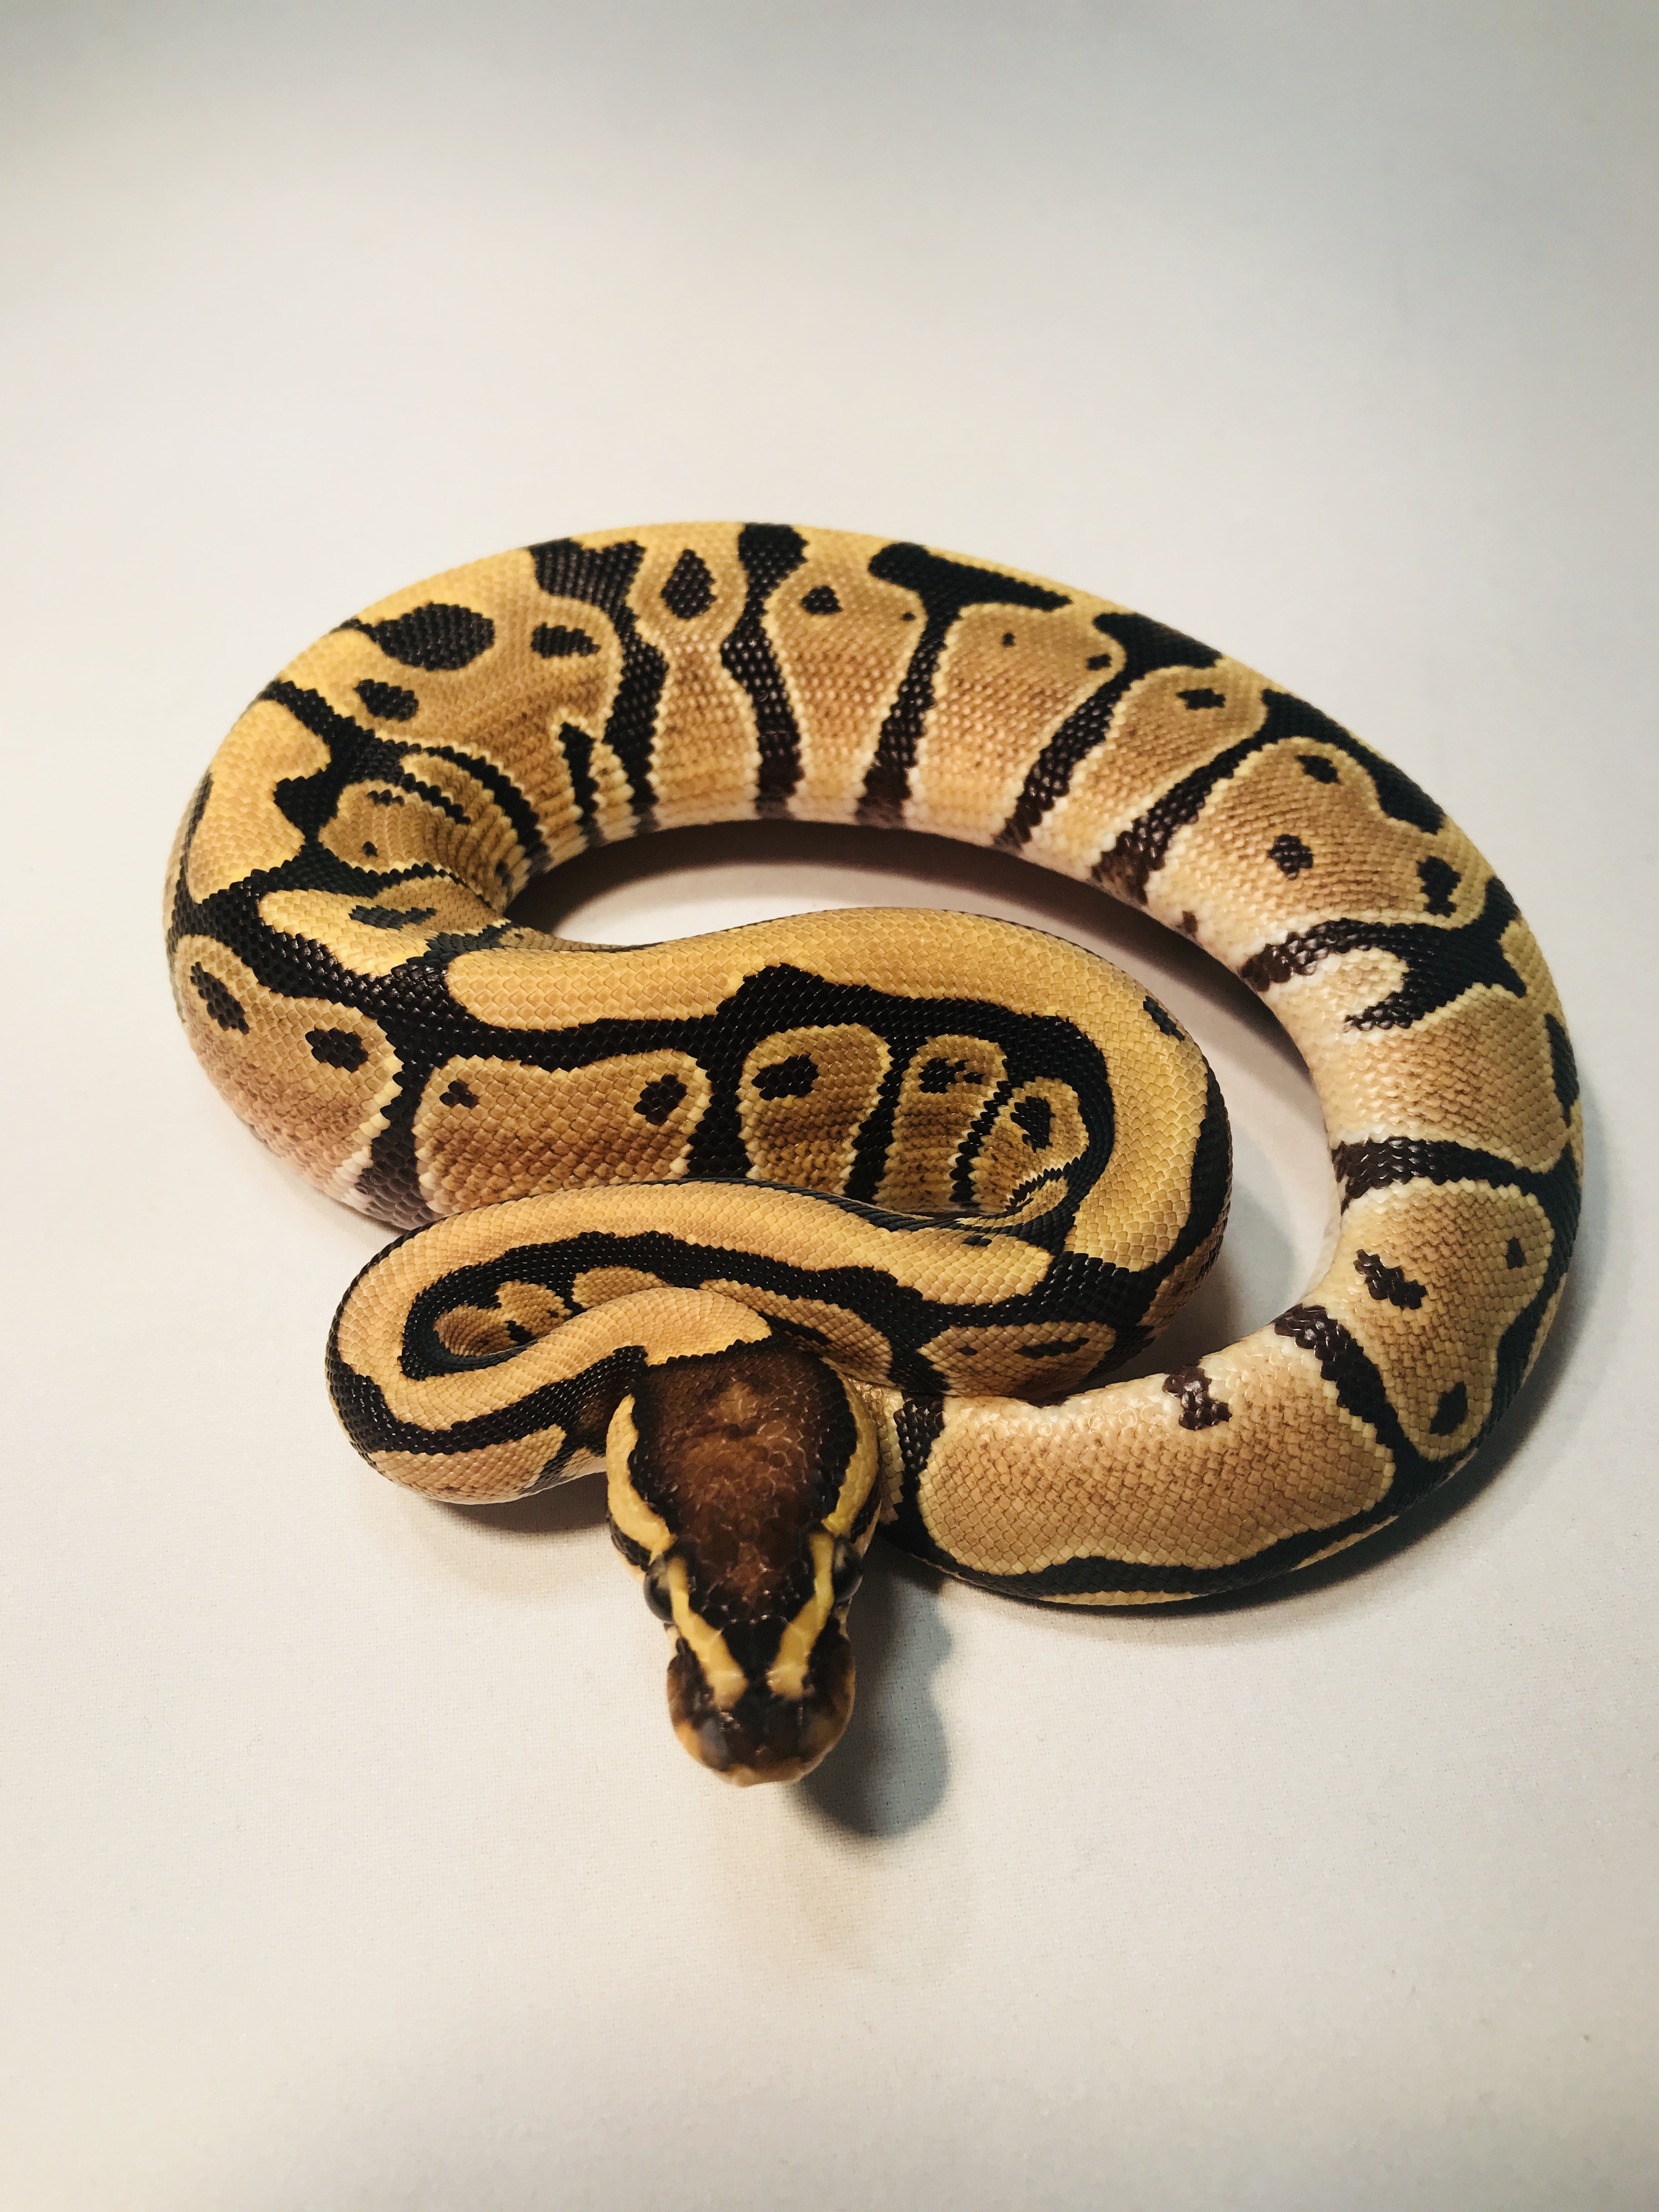 Specter Ball Python by J&T Constrictors